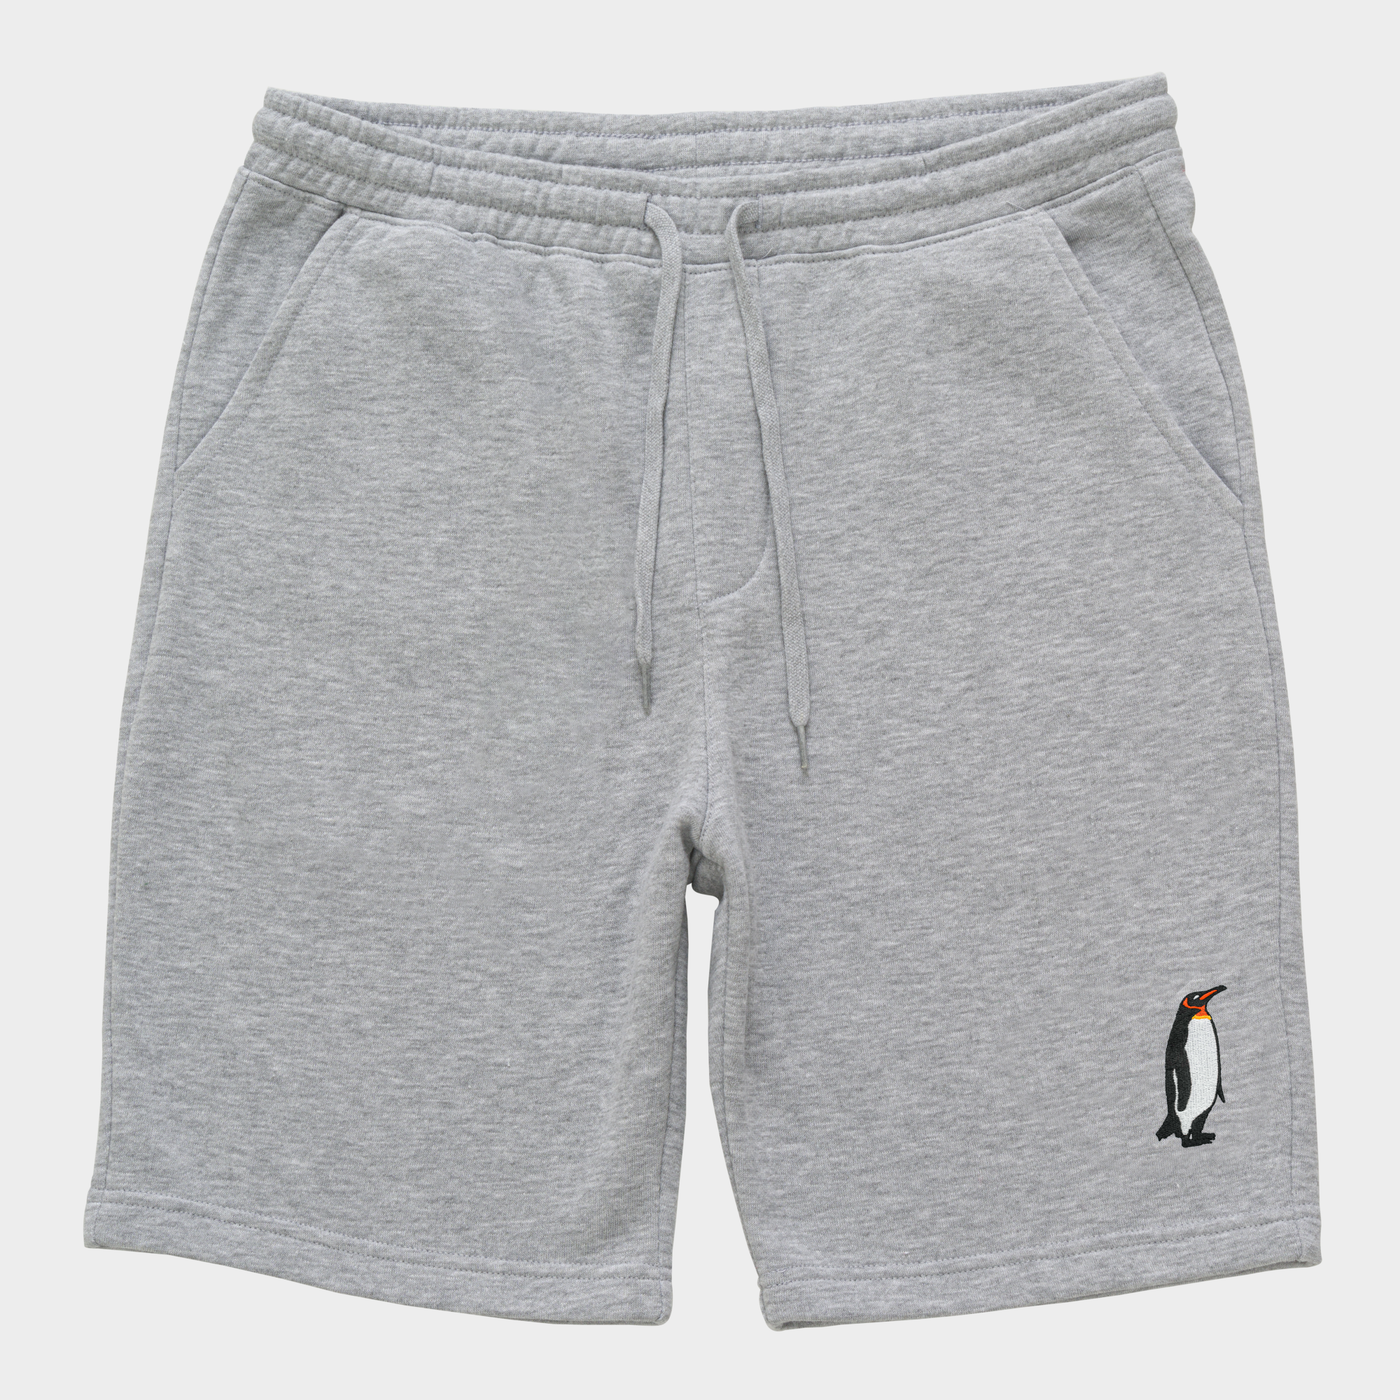 Bobby's Planet Men's Embroidered Penguin Shorts from Arctic Polar Animals Collection in Heather Grey Color#color_heather-grey